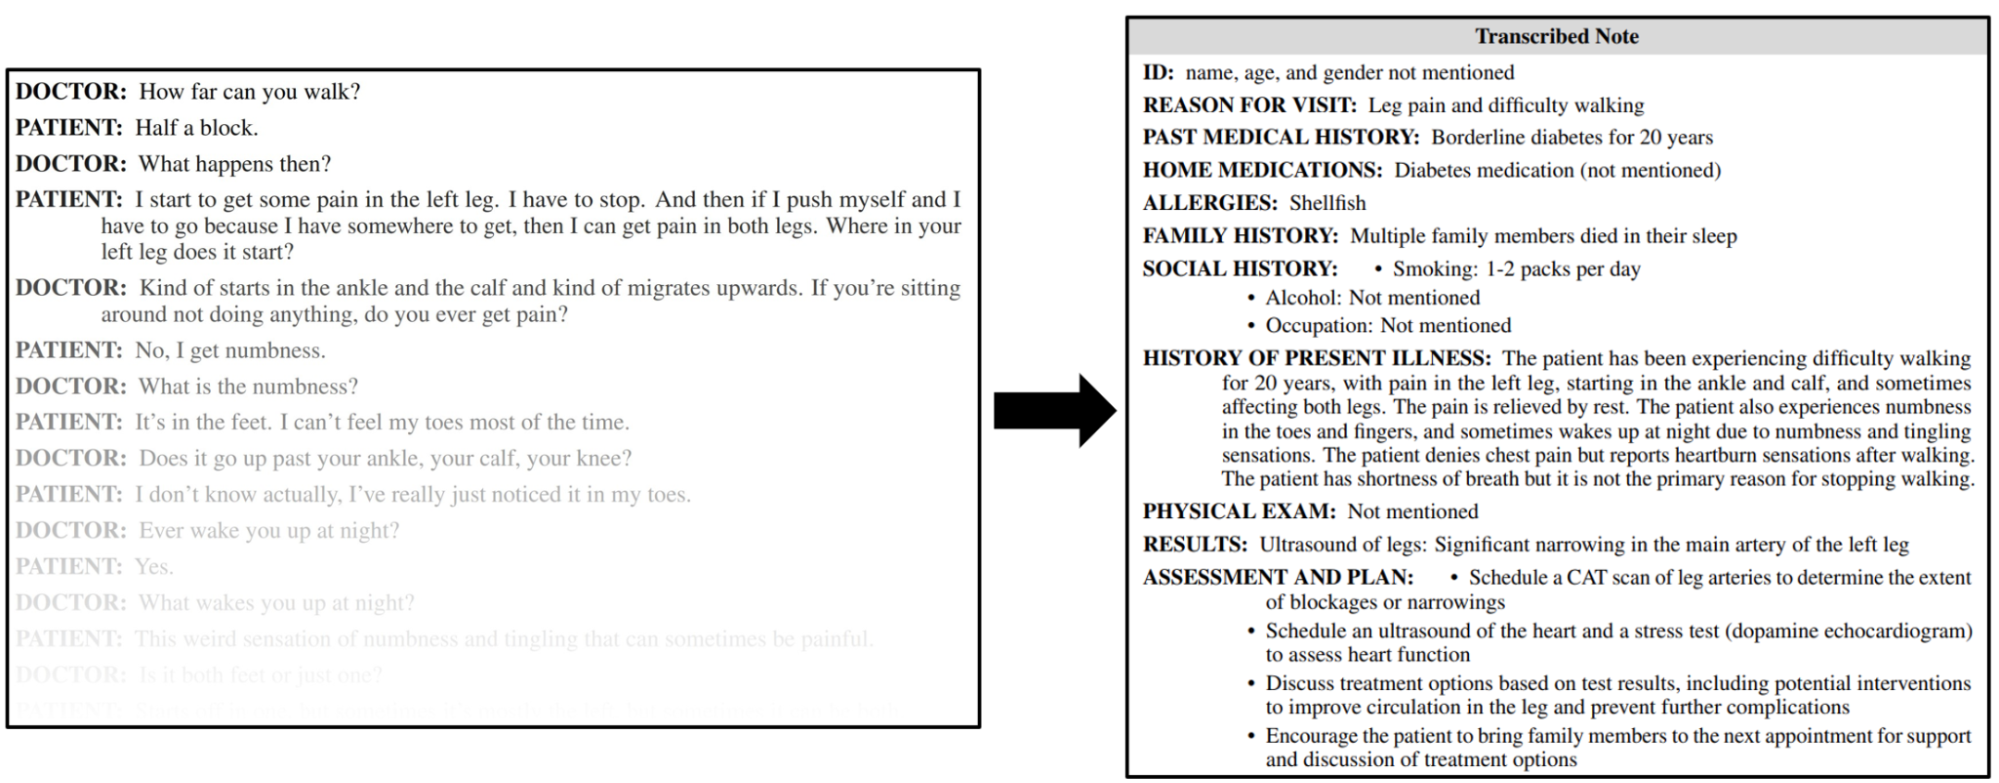 Clinical notes between a doctor and patient, generated by the Clinical Camel model.